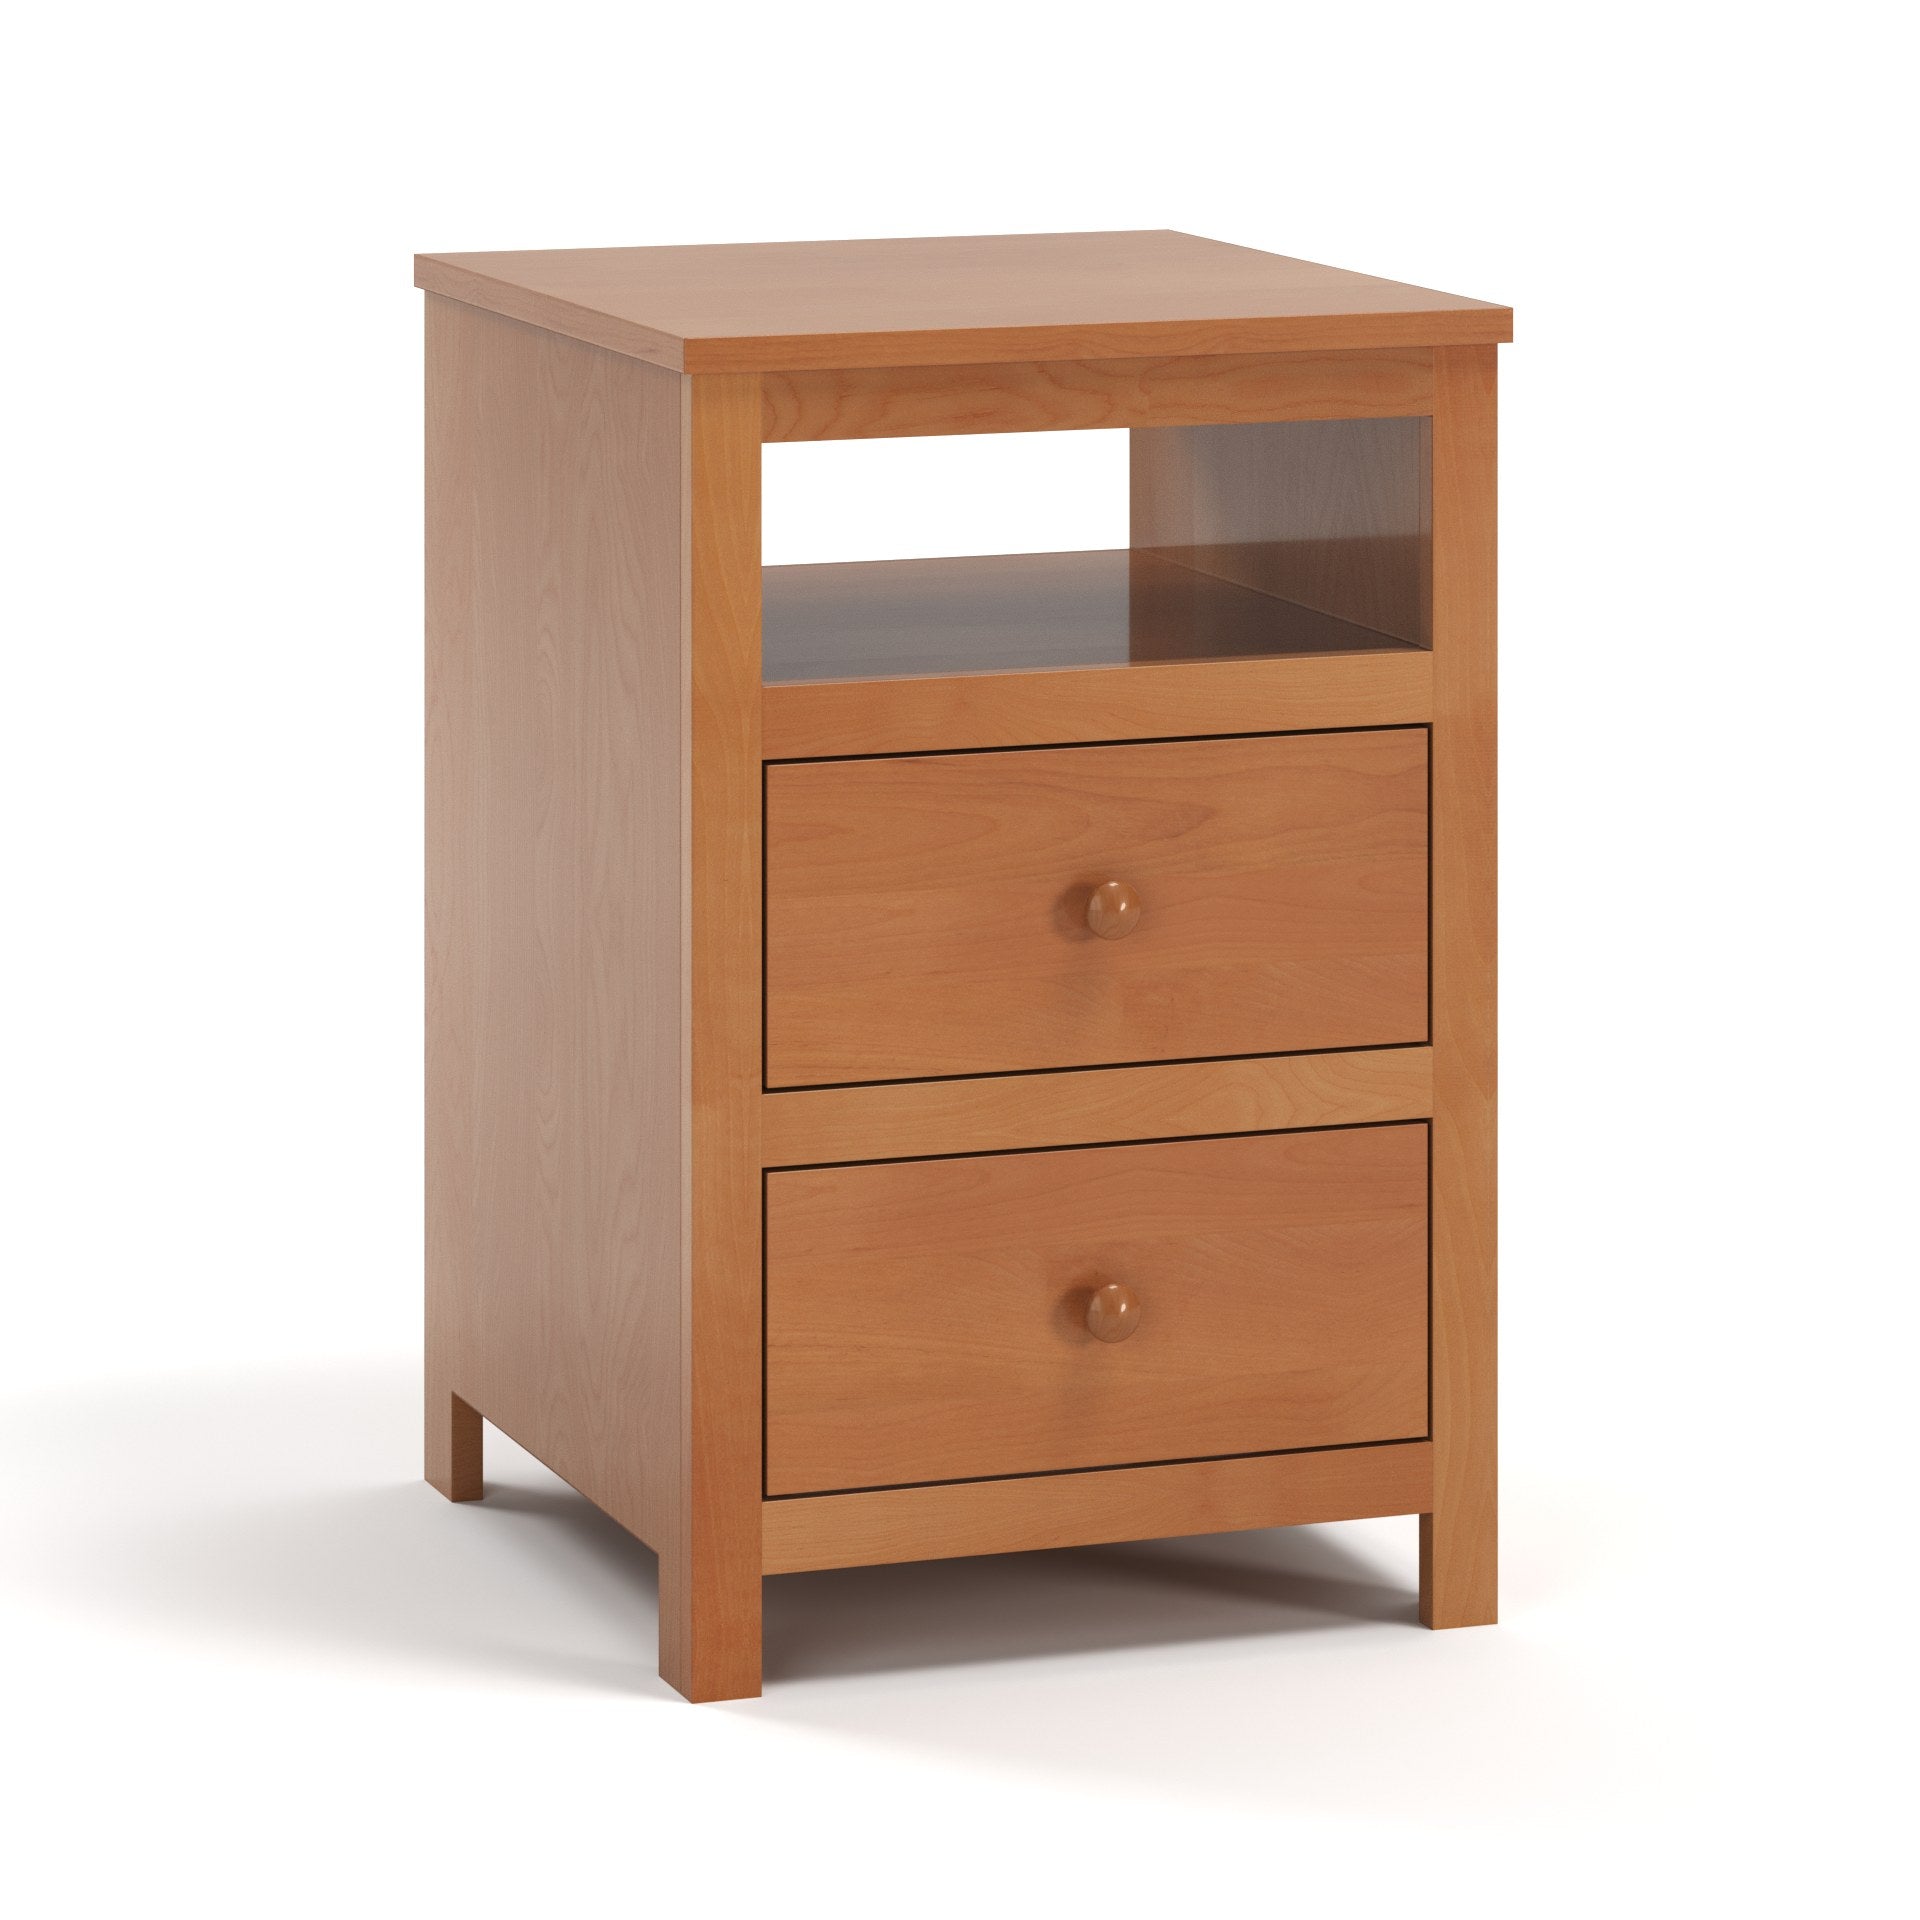 Acadia Tremont Two Drawer Nightstand with Open Space Features two full extension drawers and an open space for additional storage. Shown in Nutmeg finish.